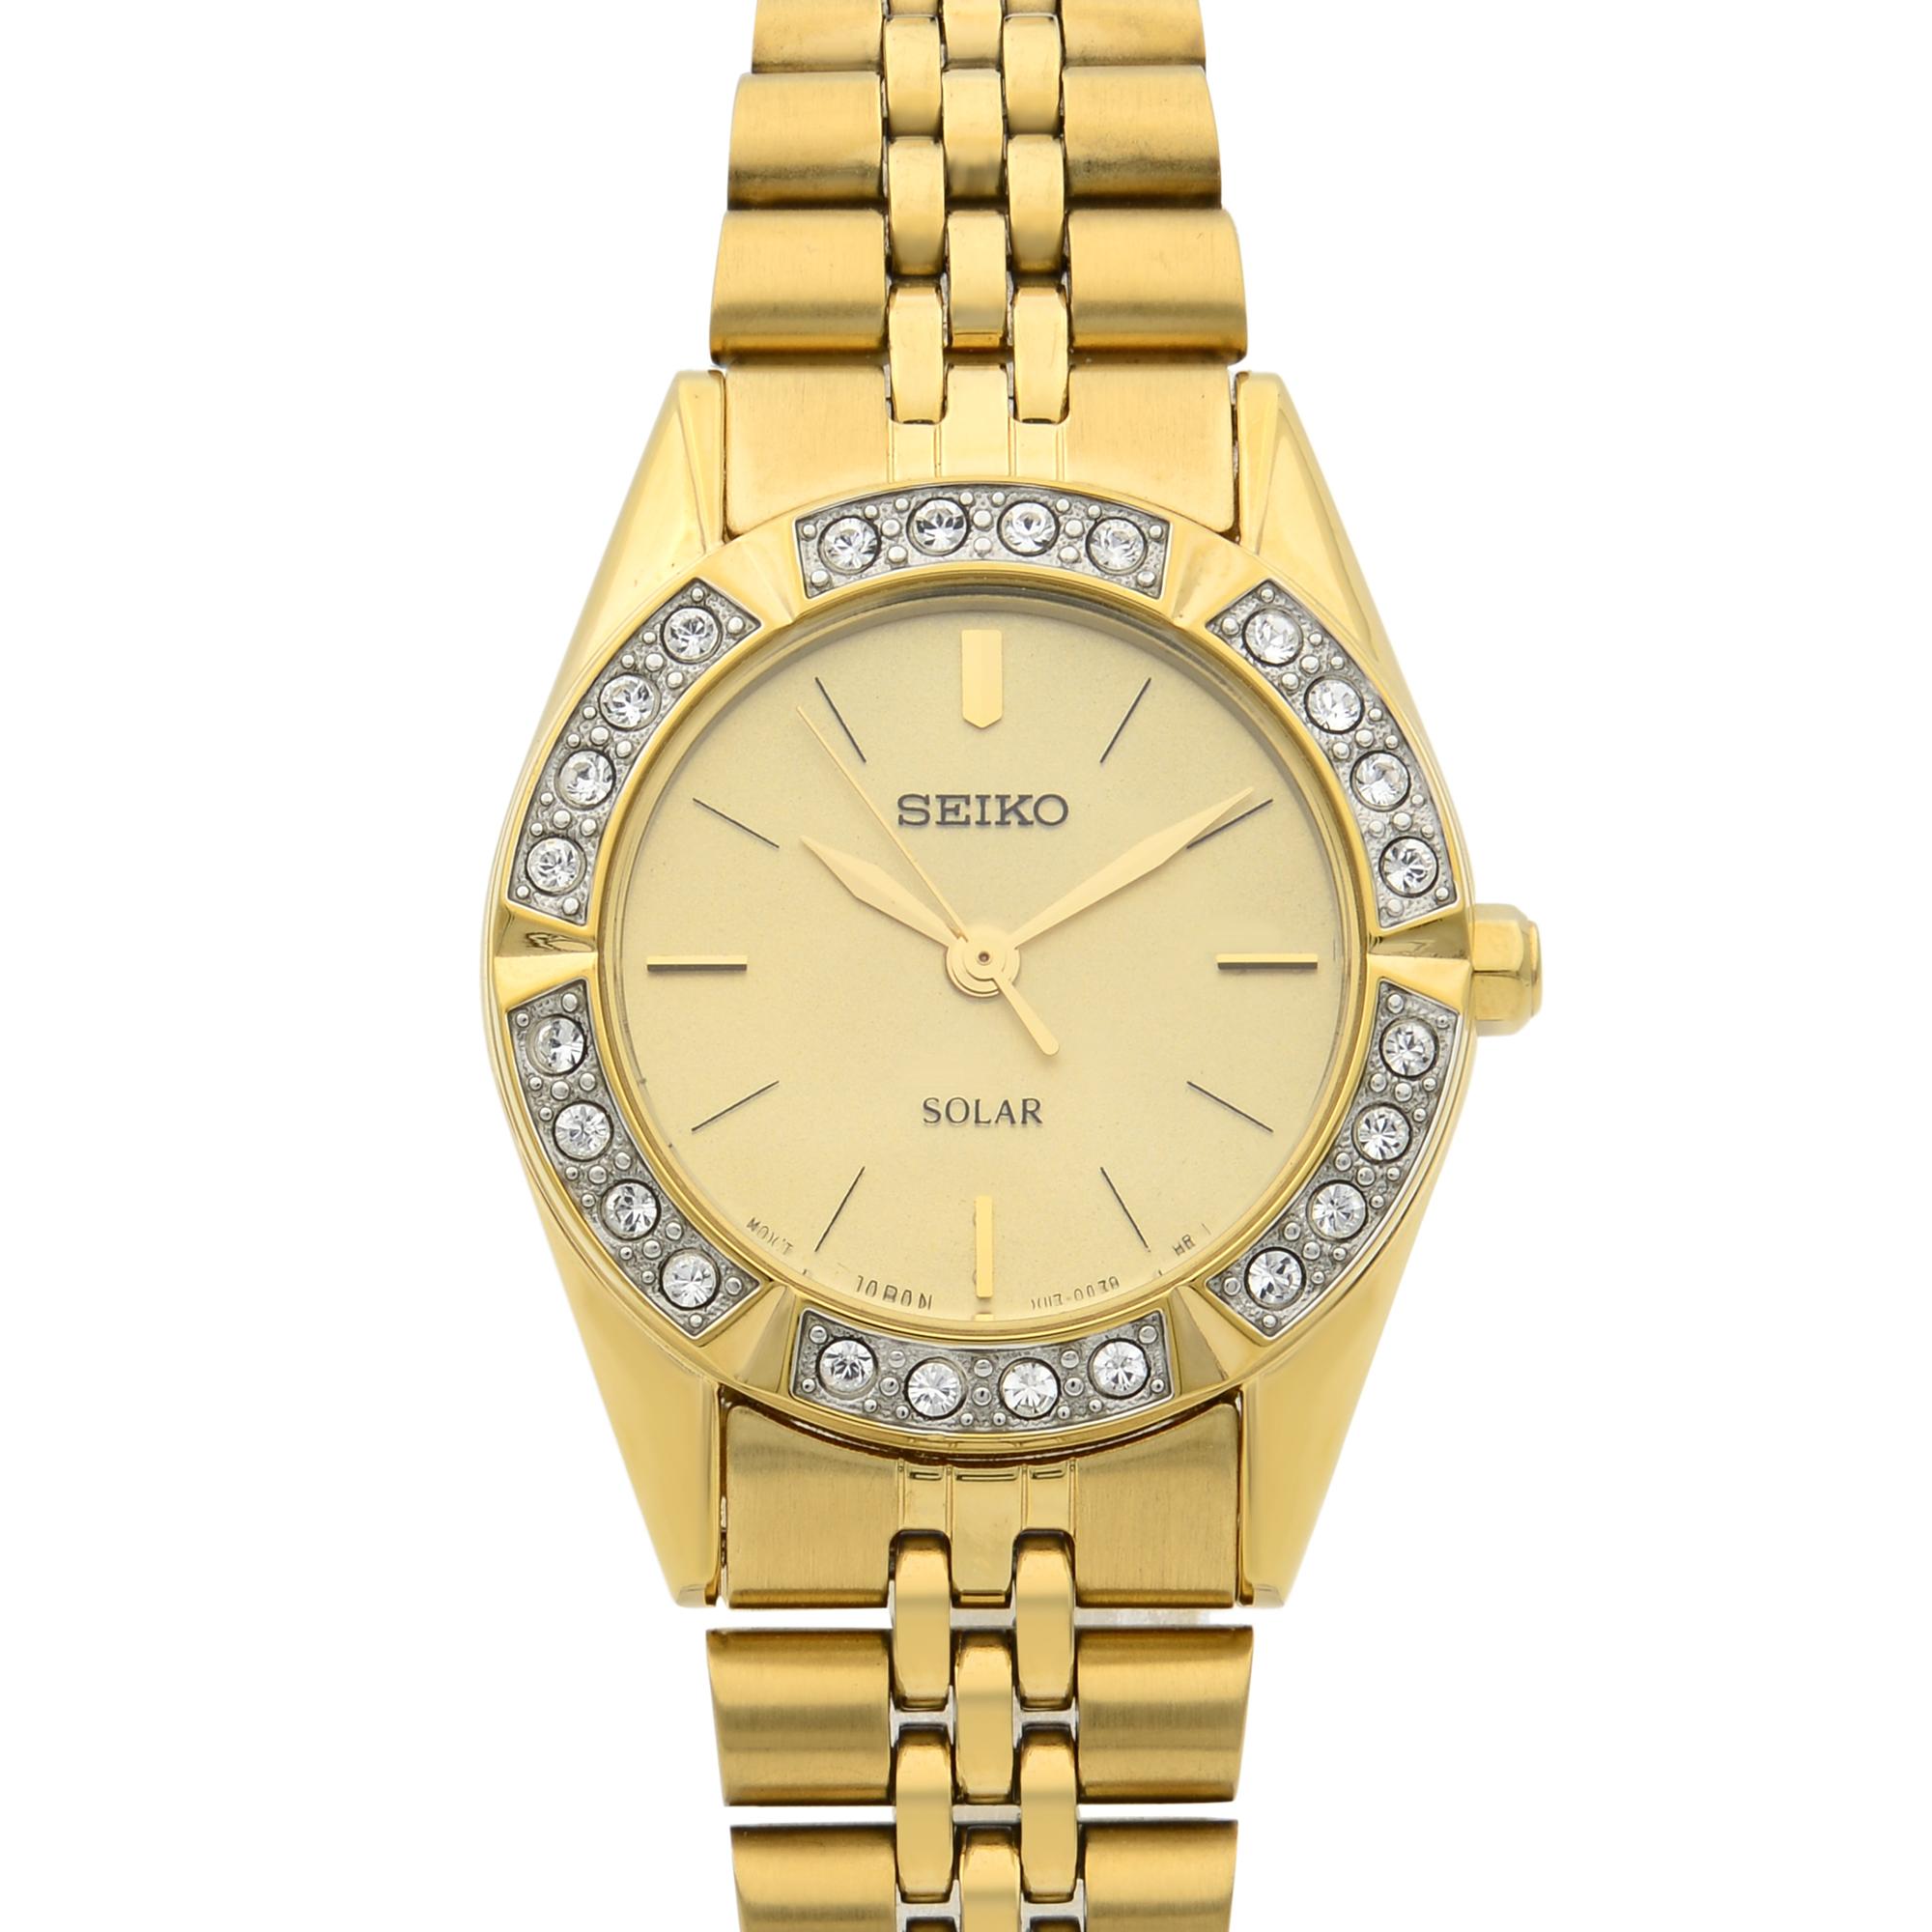 This watch is in pre-owned condition. The timepiece has minor scratches. 
Gold-tone stainless steel case and bracelet. Fixed gold-tone bezel set with Swarovski crystals. 
Champagne dial with gold-tone hands and index hour markers. Solar quartz